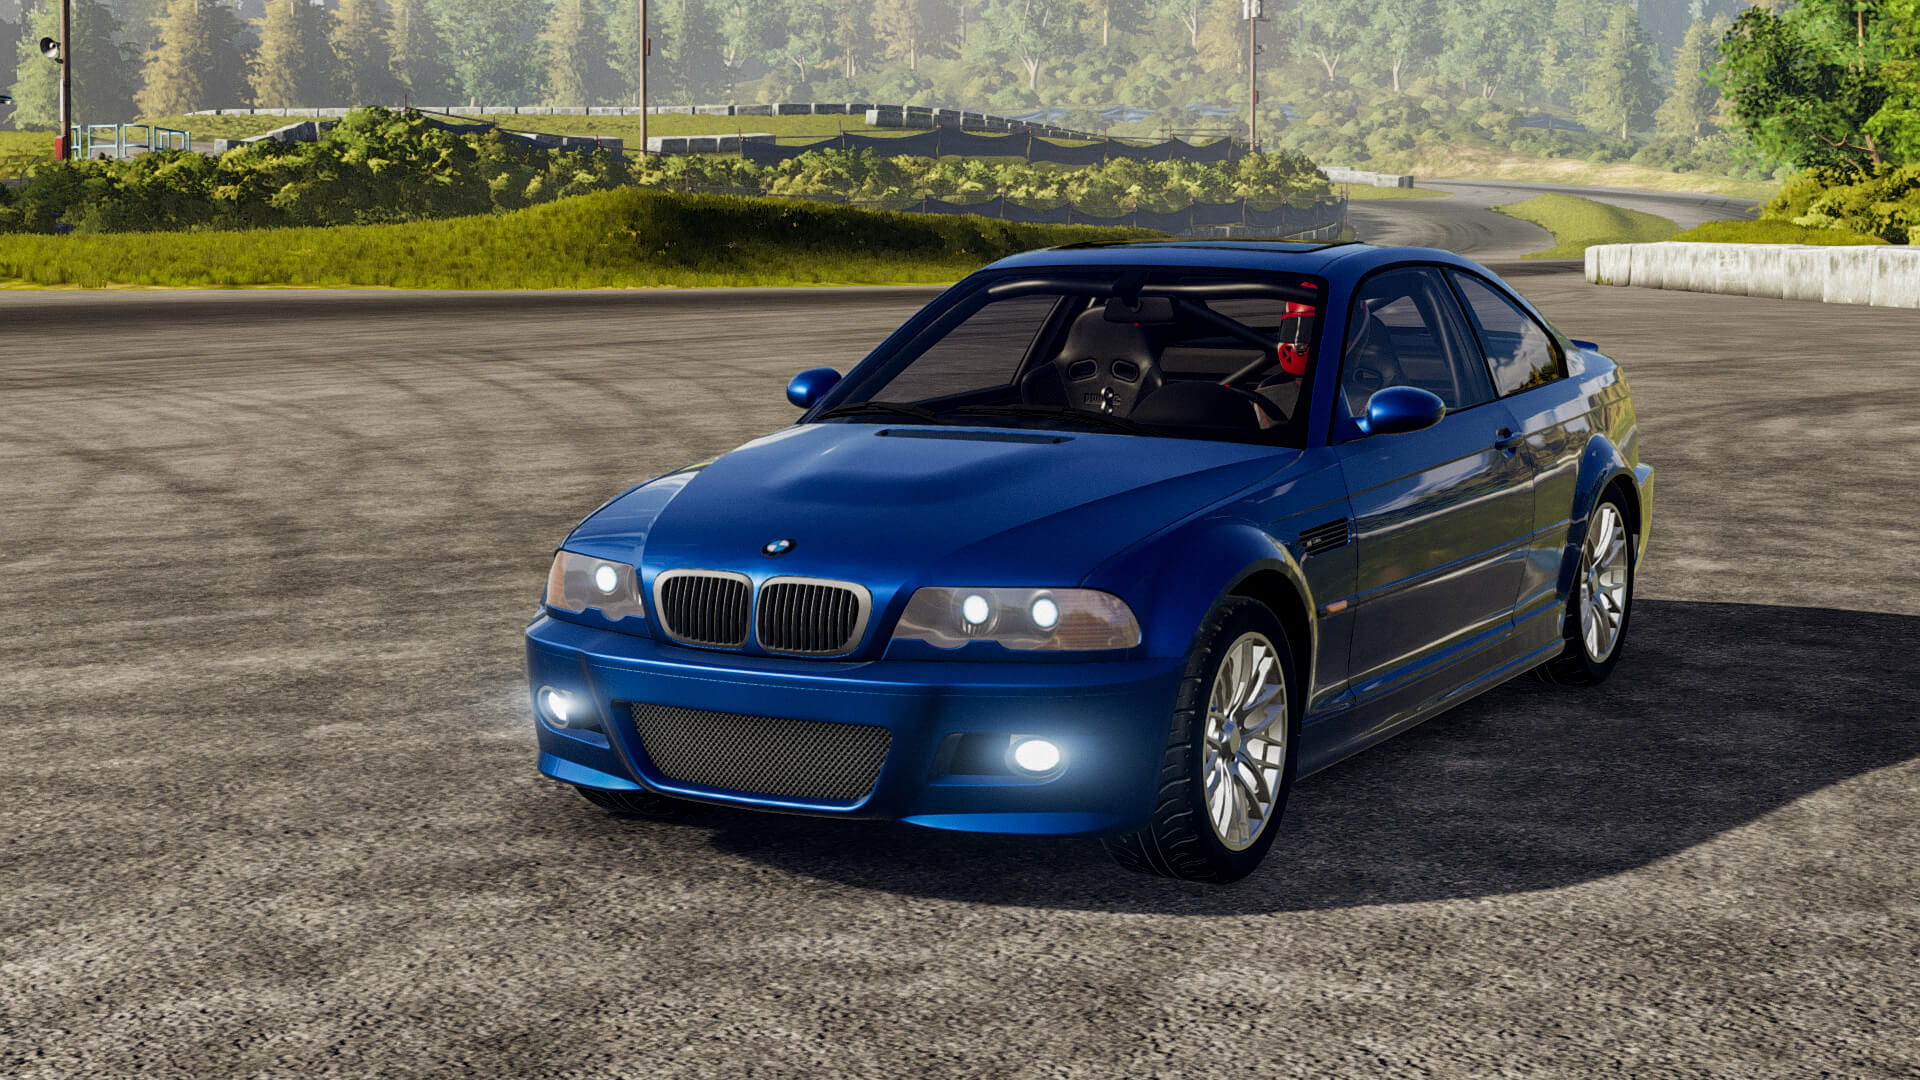 DRIFT21 Adds BMW E46 and More in Content Update